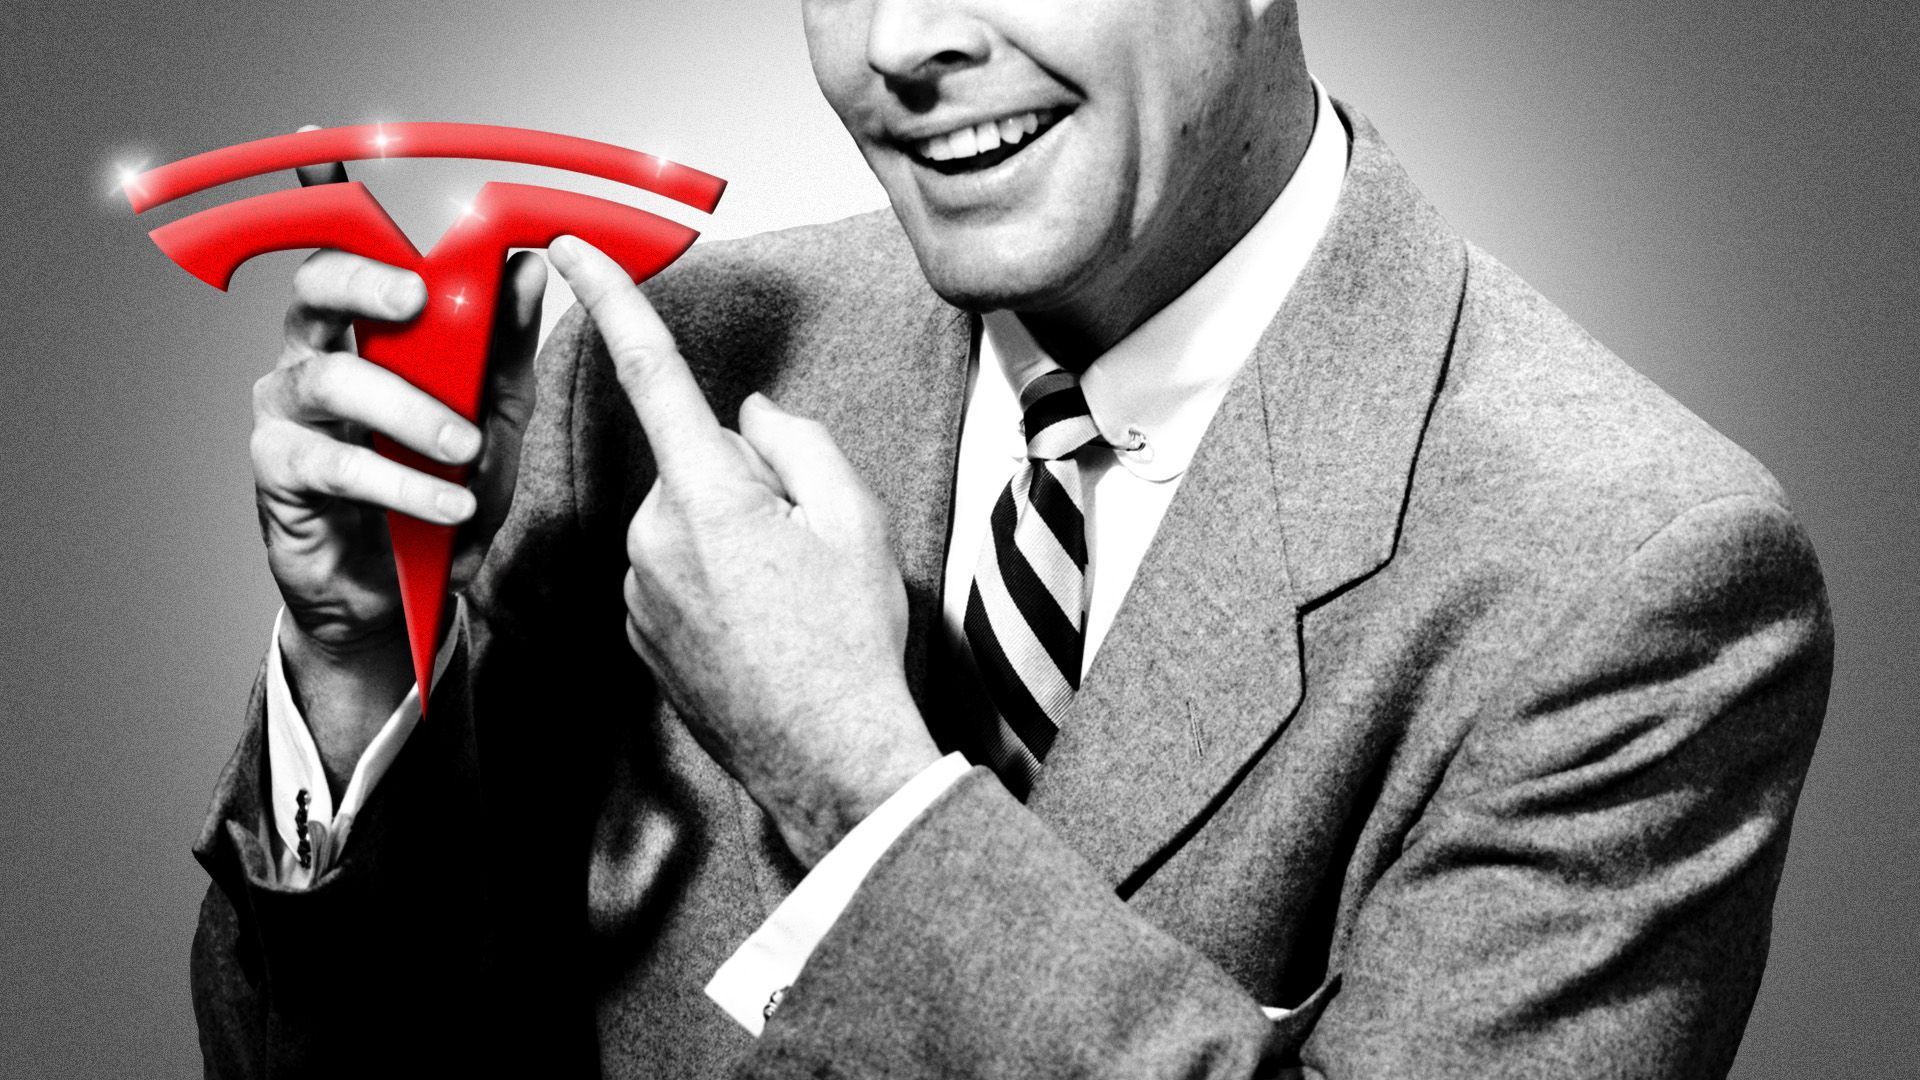 Illustration of a vintage advertisement of a man pointing at the Tesla logo